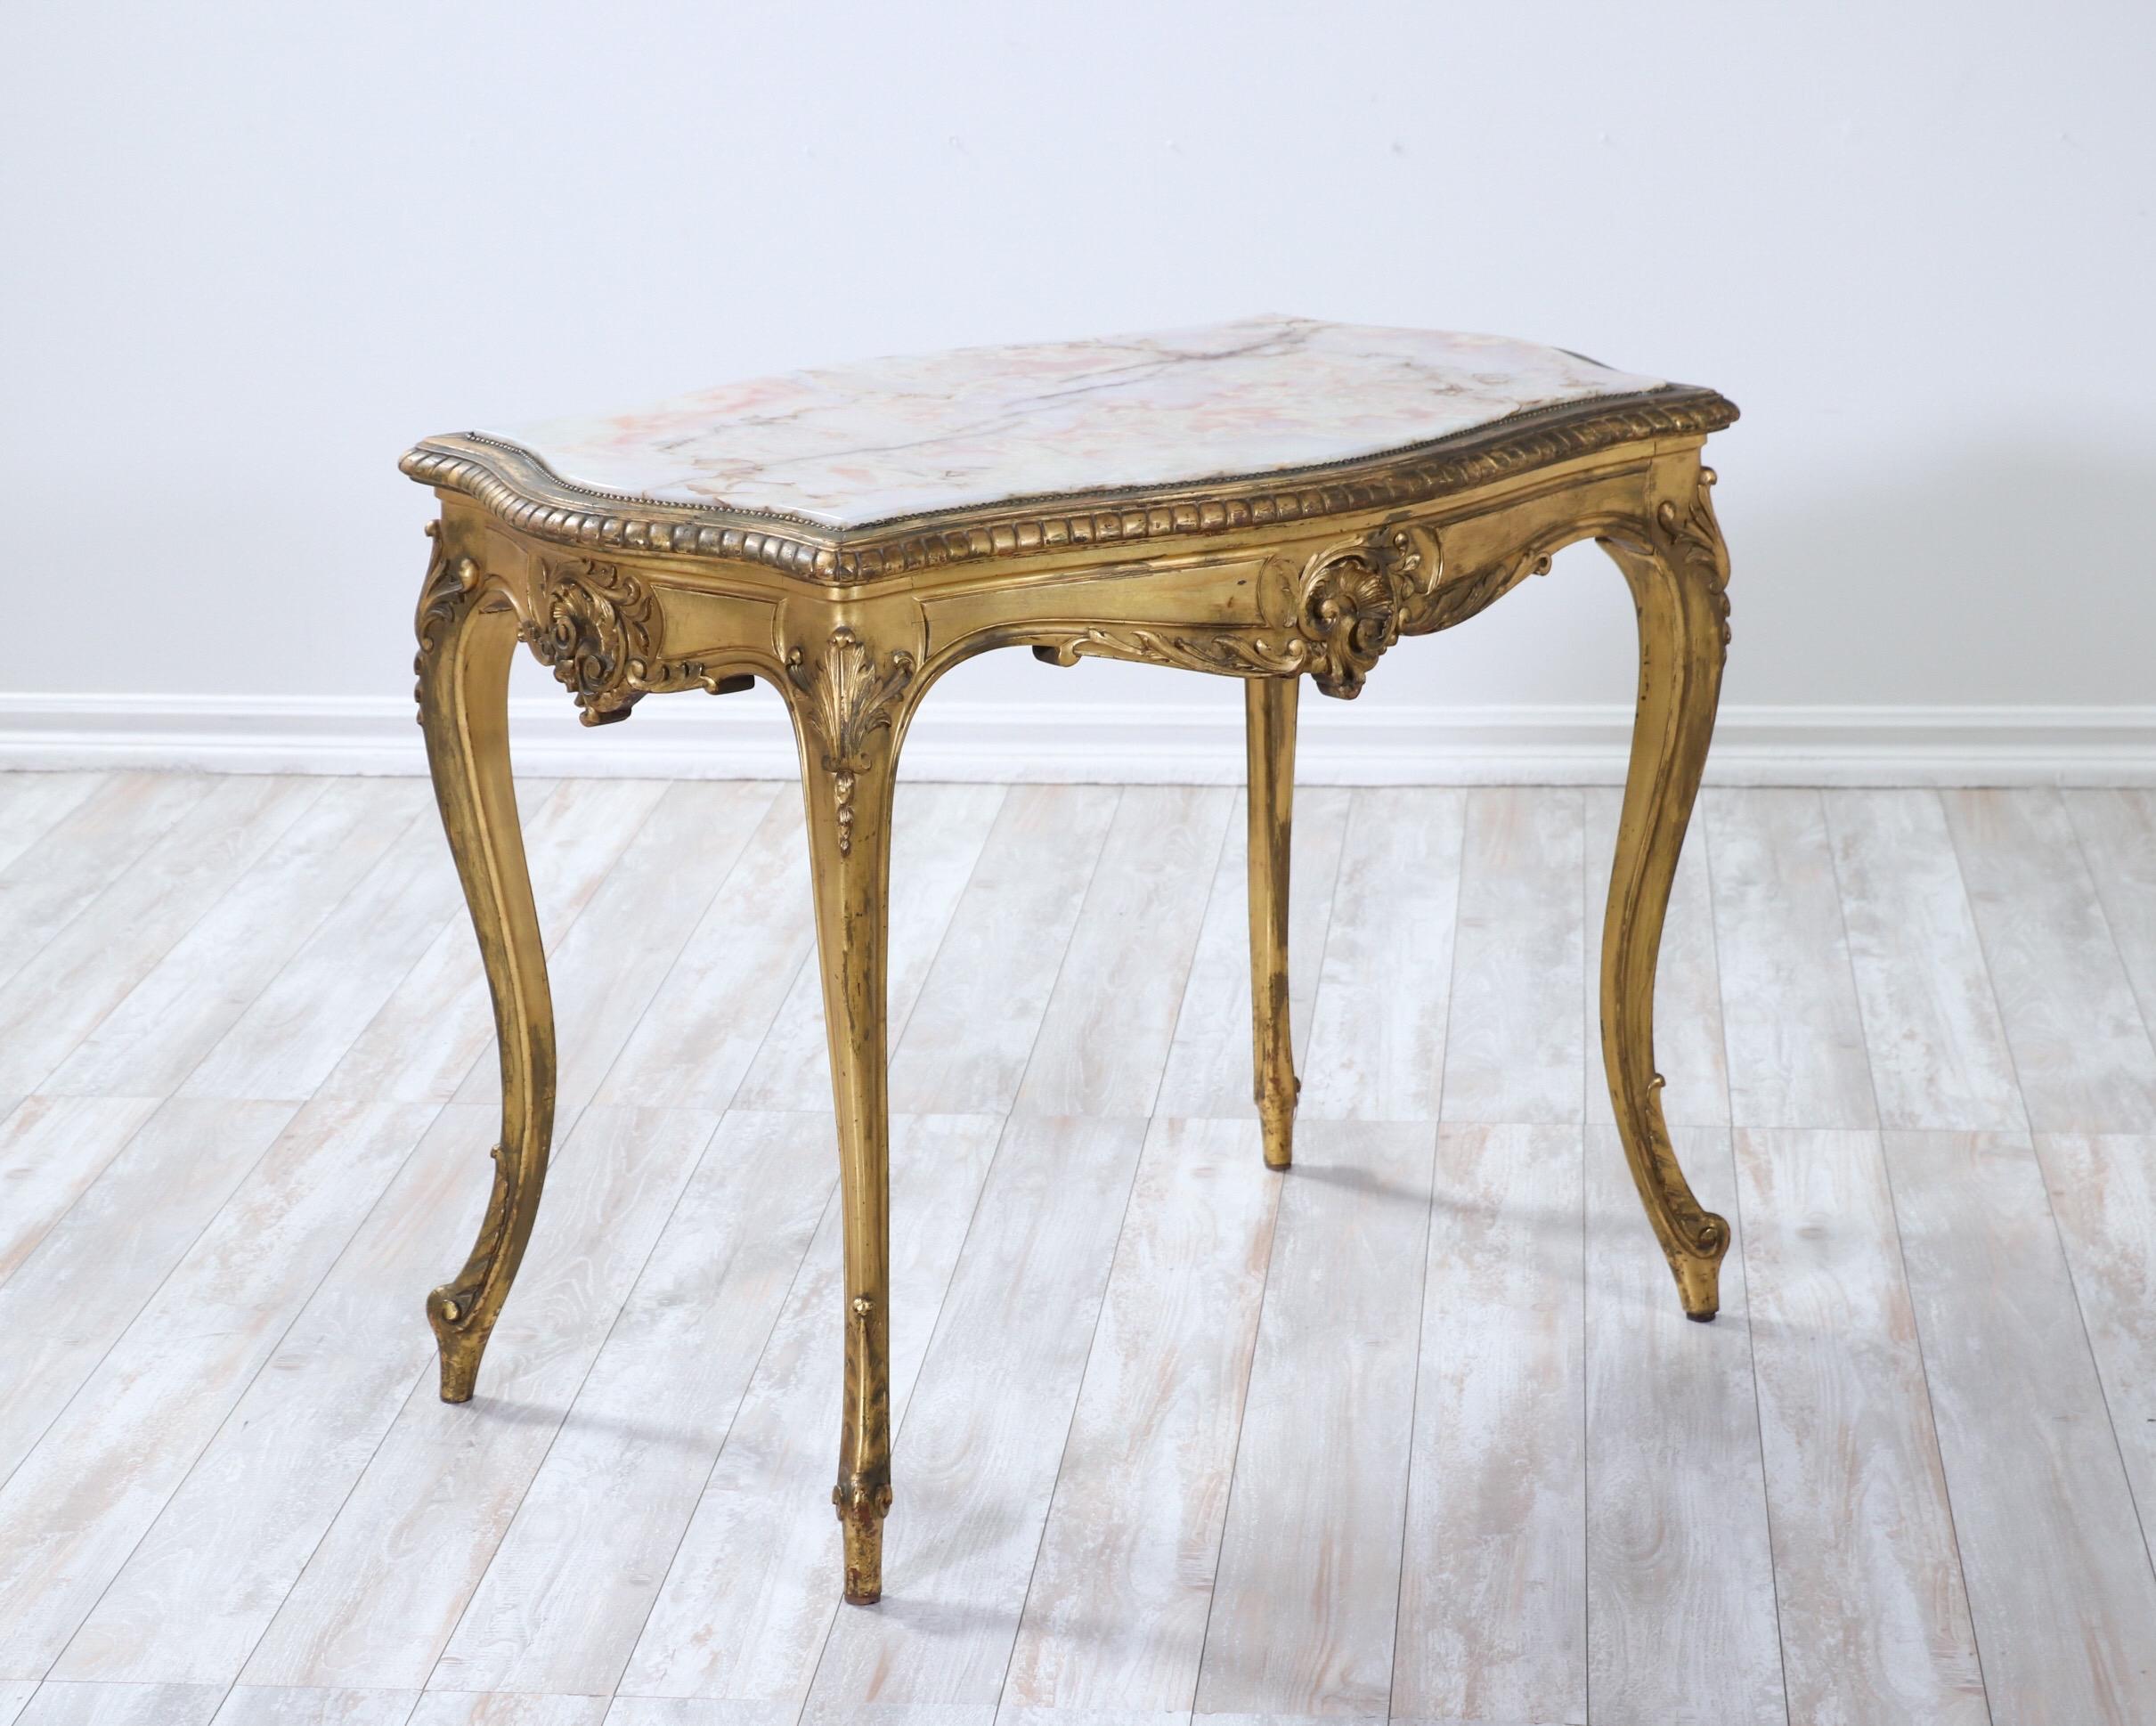 Beautiful, French 1920s giltwood and onyx-marble salon table in the Louis XV style.

Delicate carvings are featured in this “very French” salon or side table including a rocaille-themed apron and cabriole legs. The naturally aged gilt finish